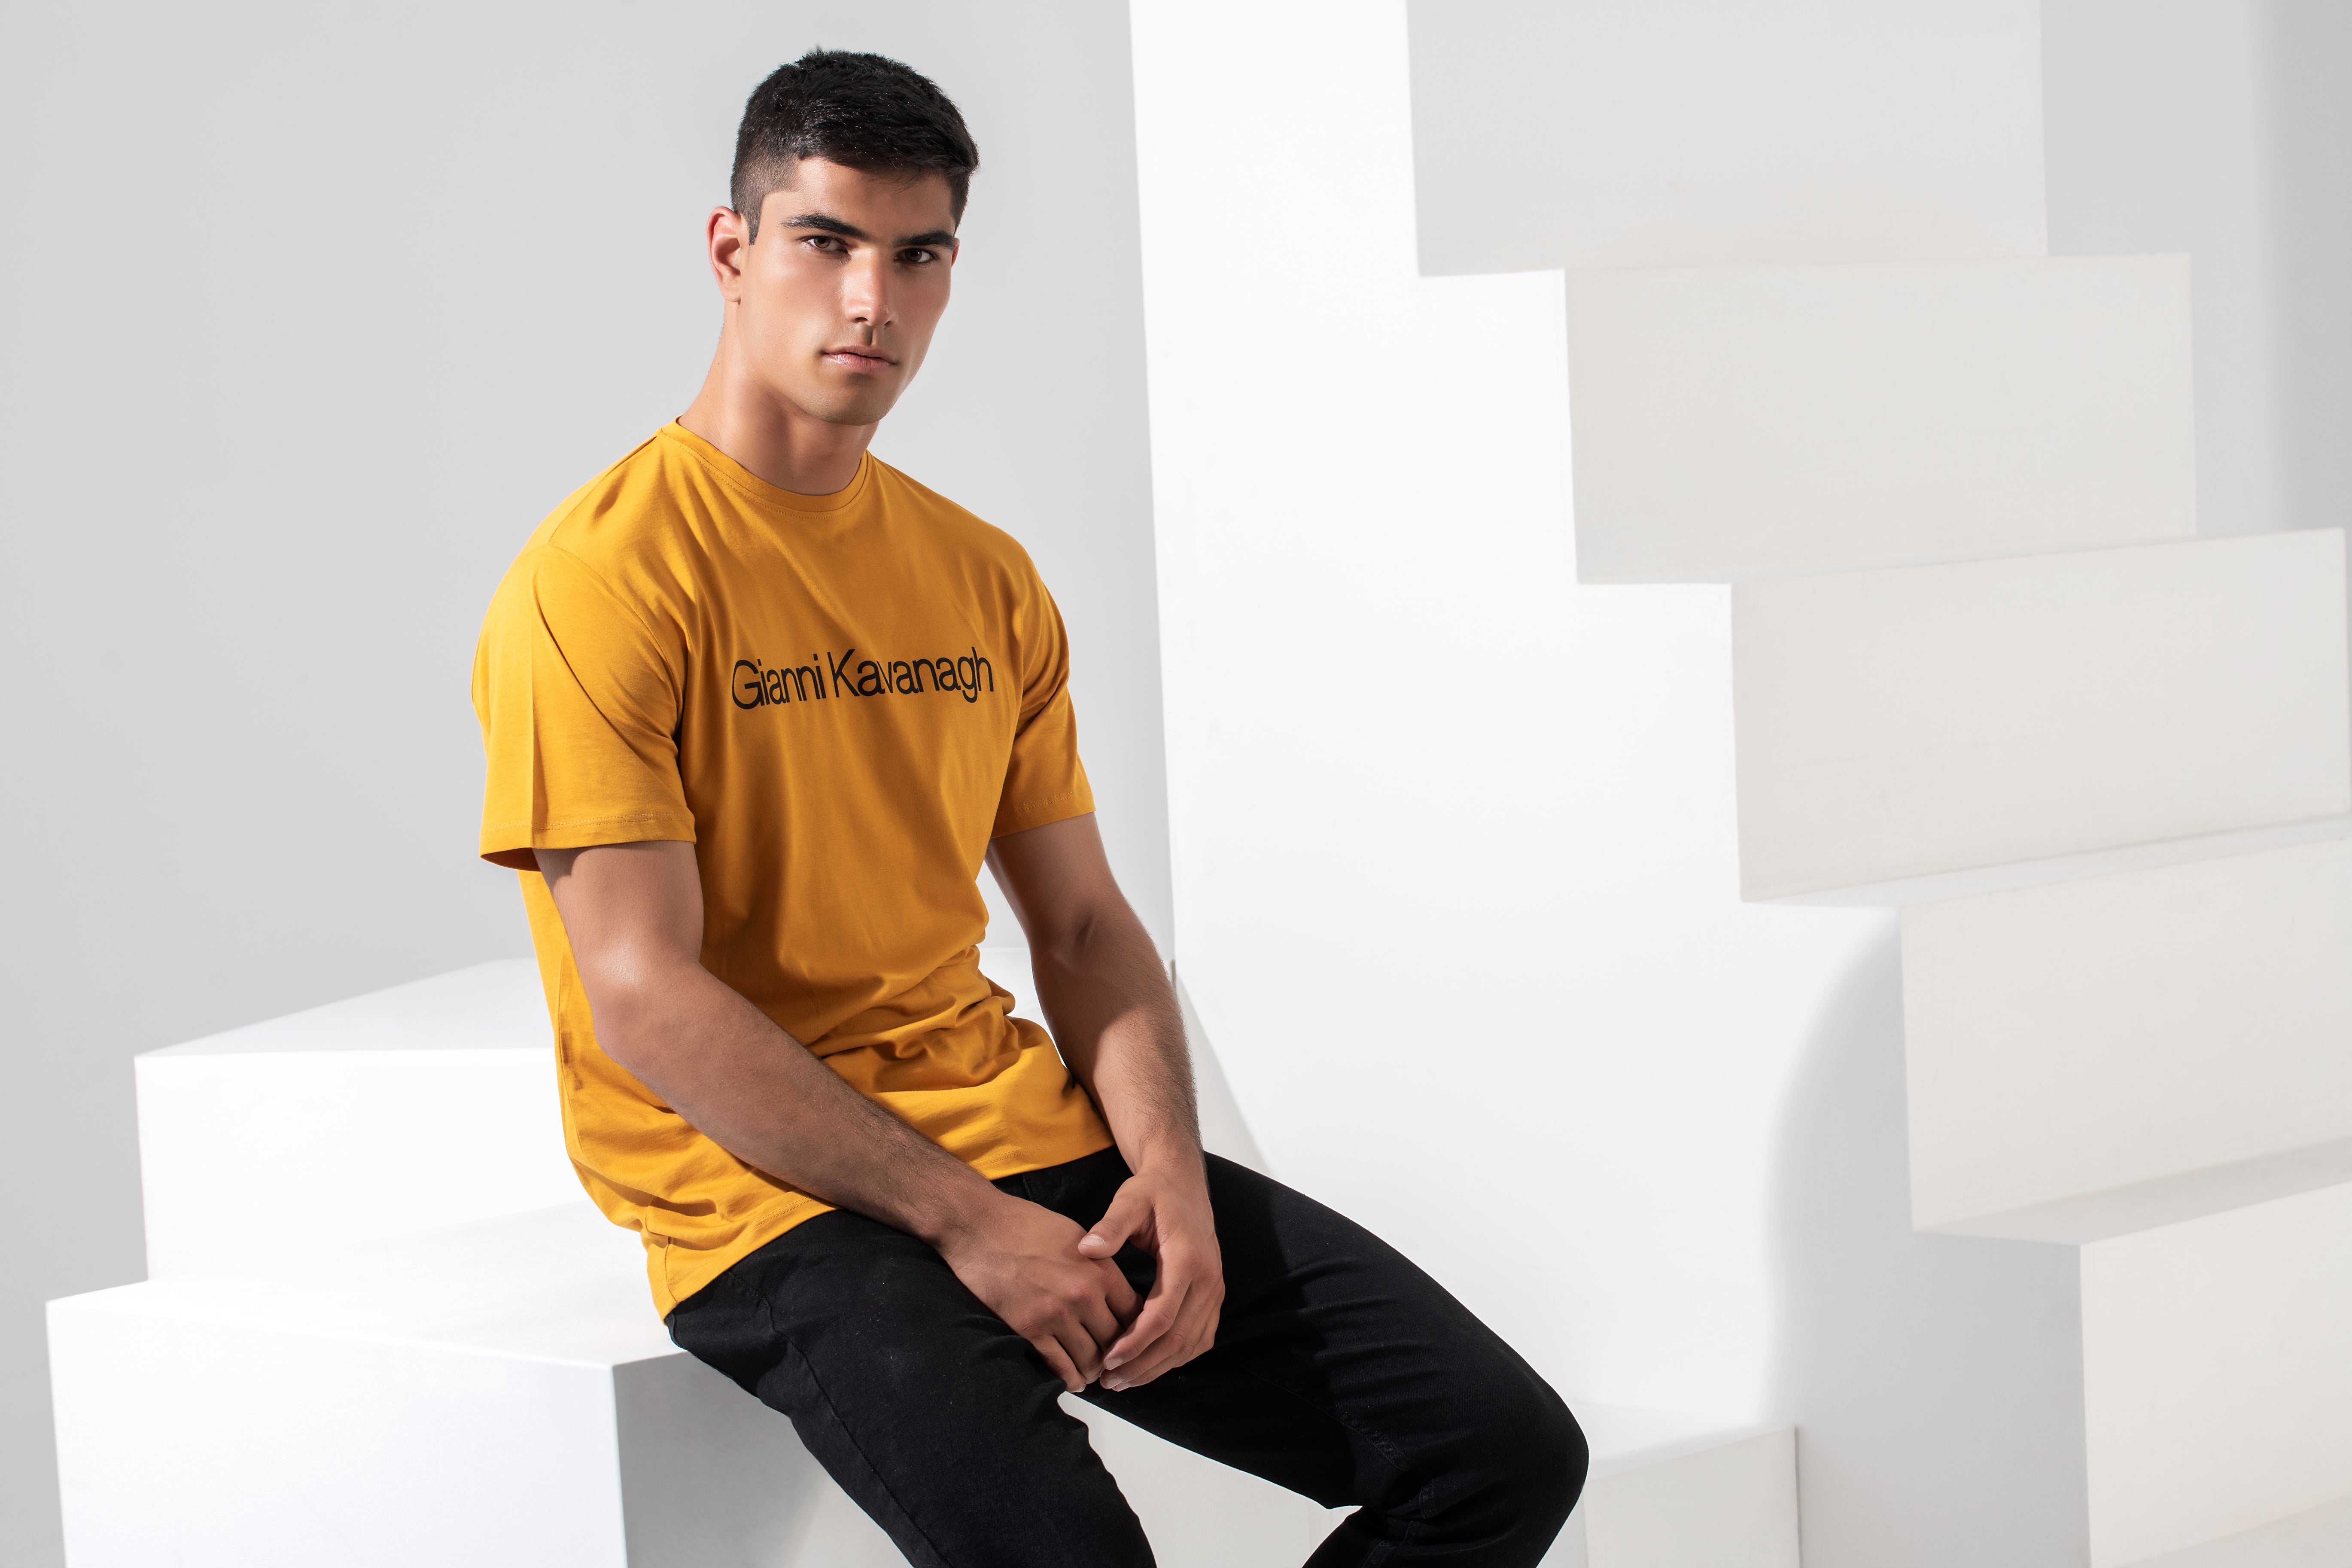 Slim Fit vs Regular Fit T-Shirts: What Is The Difference?